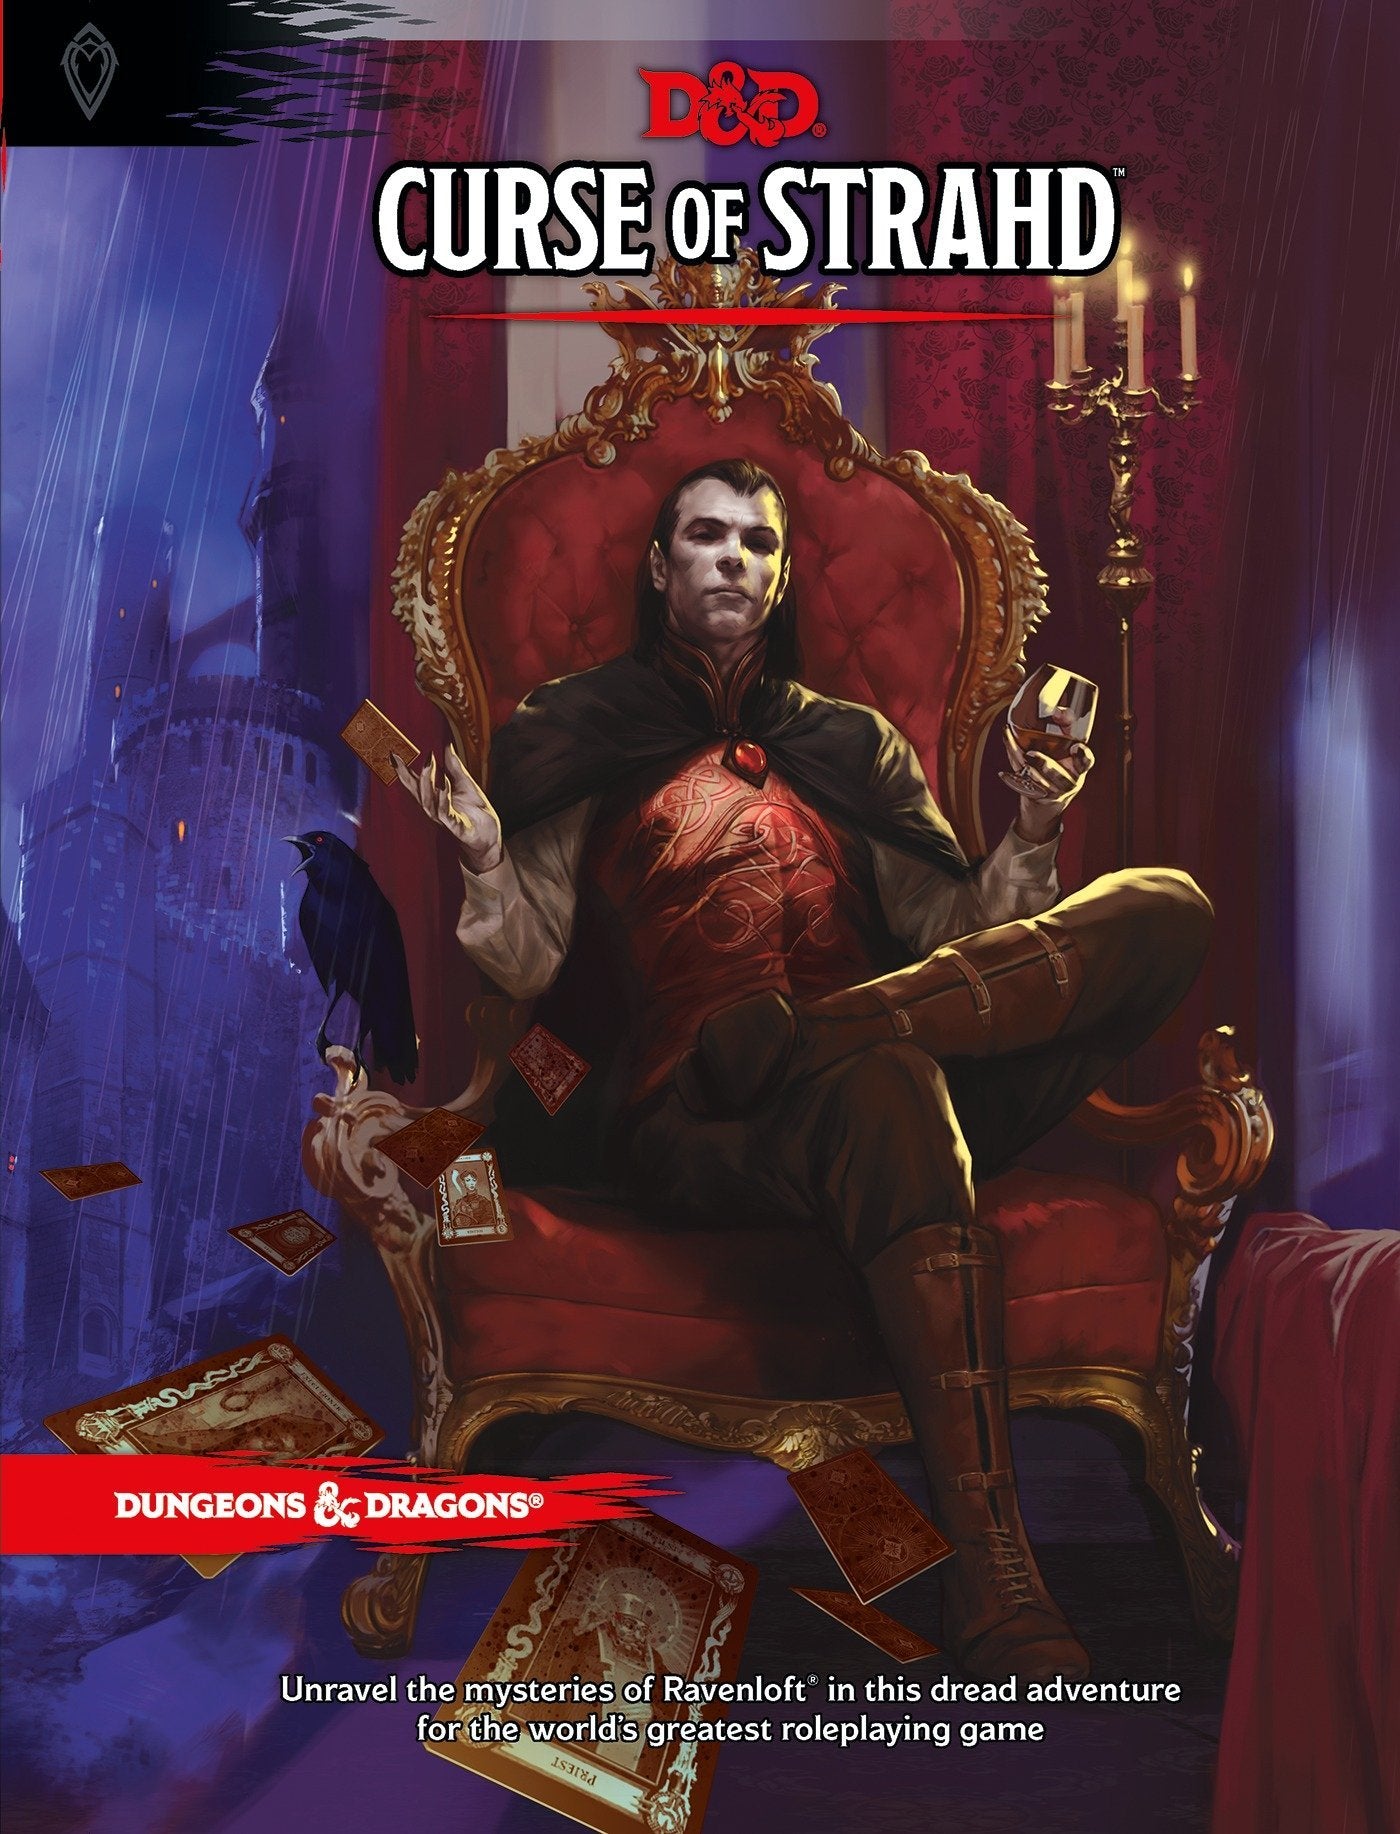 Dungeons & Dragons 5th edition - Curse of Strahd